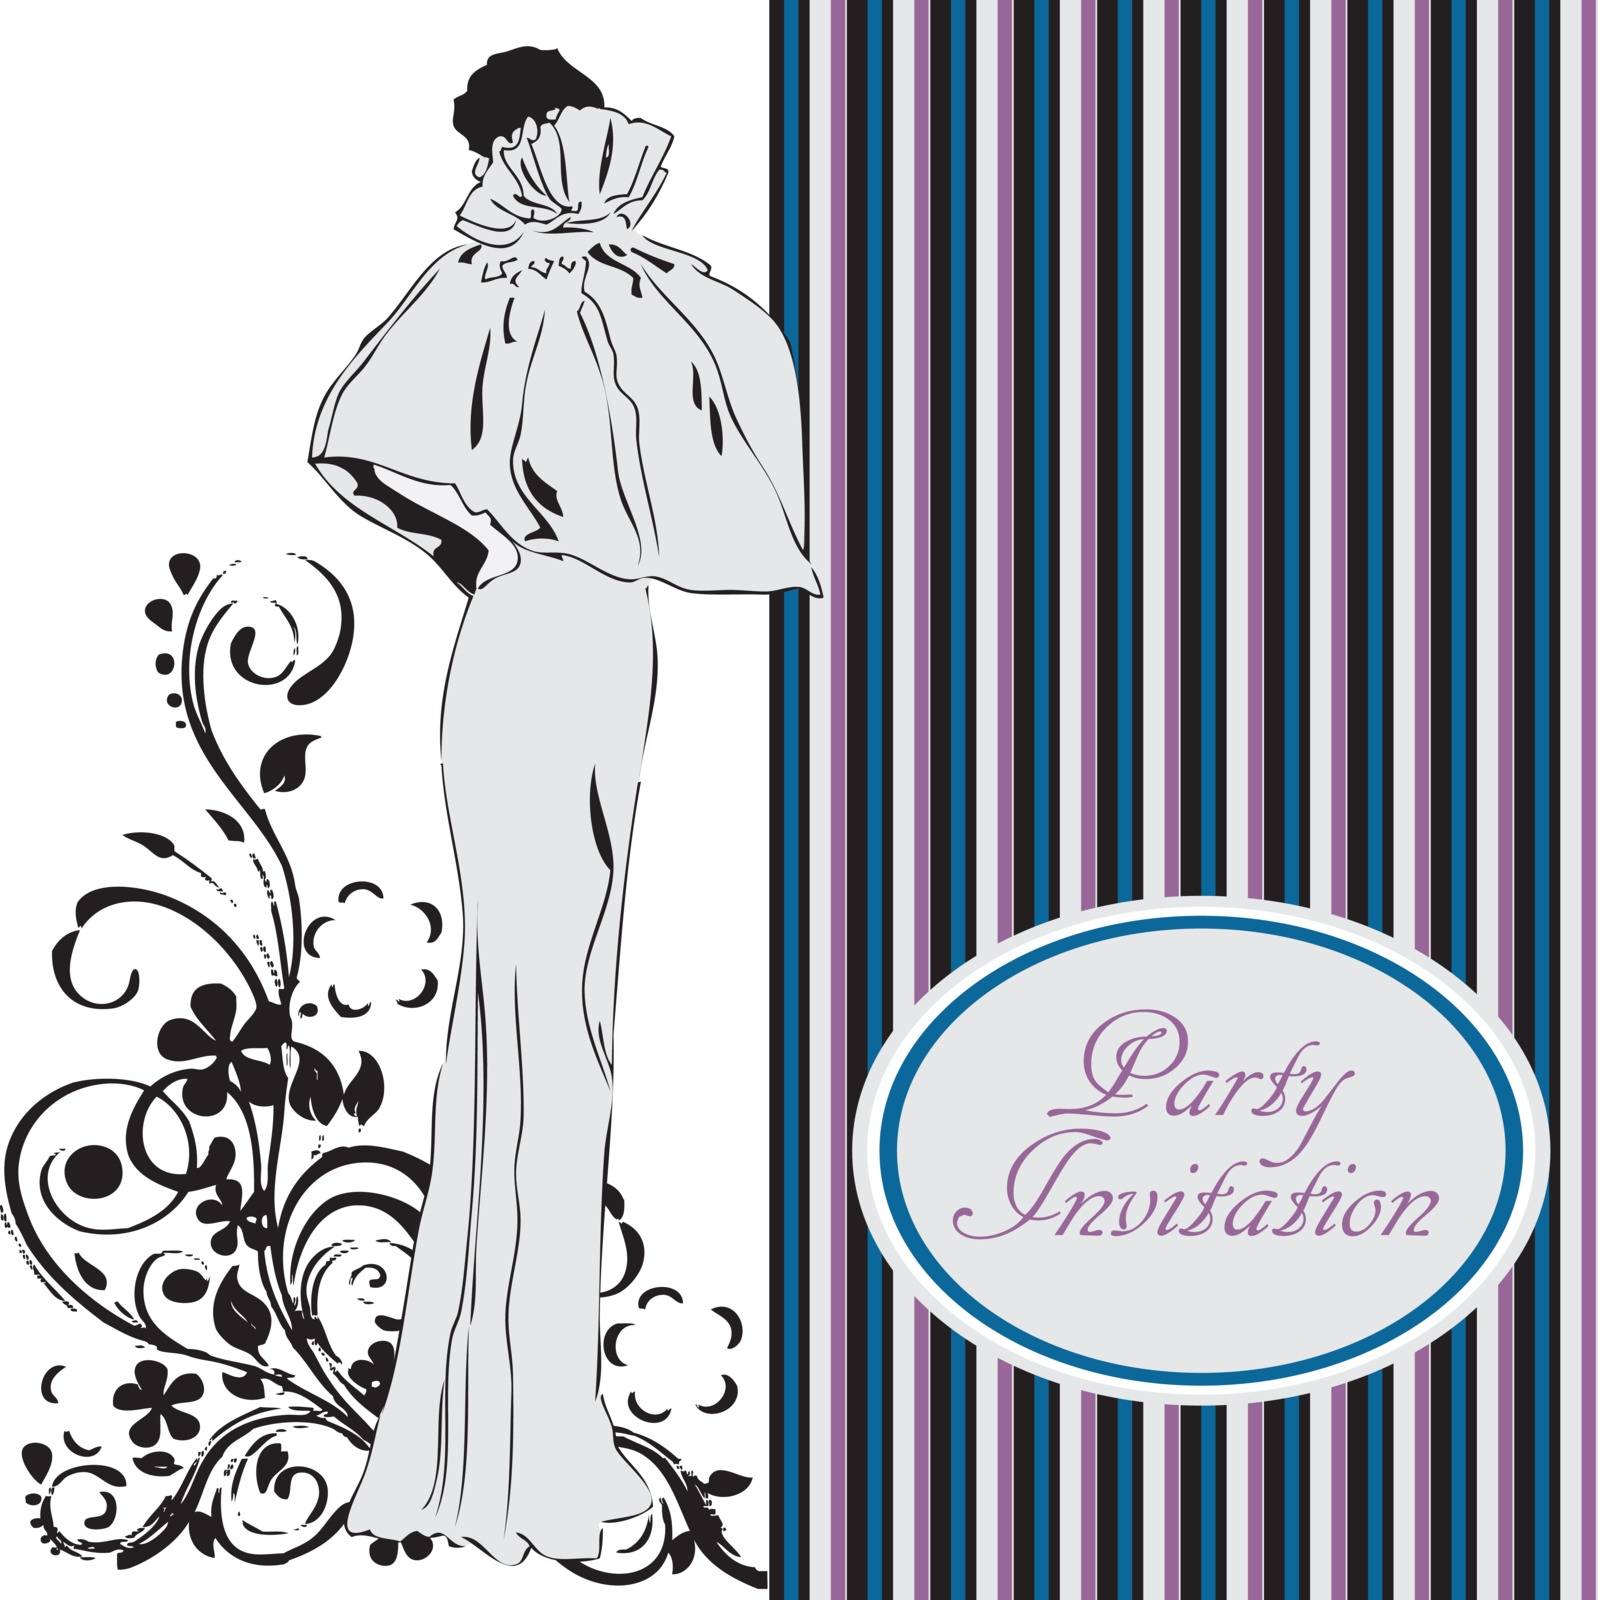 Card Invitation to a party with a woman in an evening dress. Vector illustration.